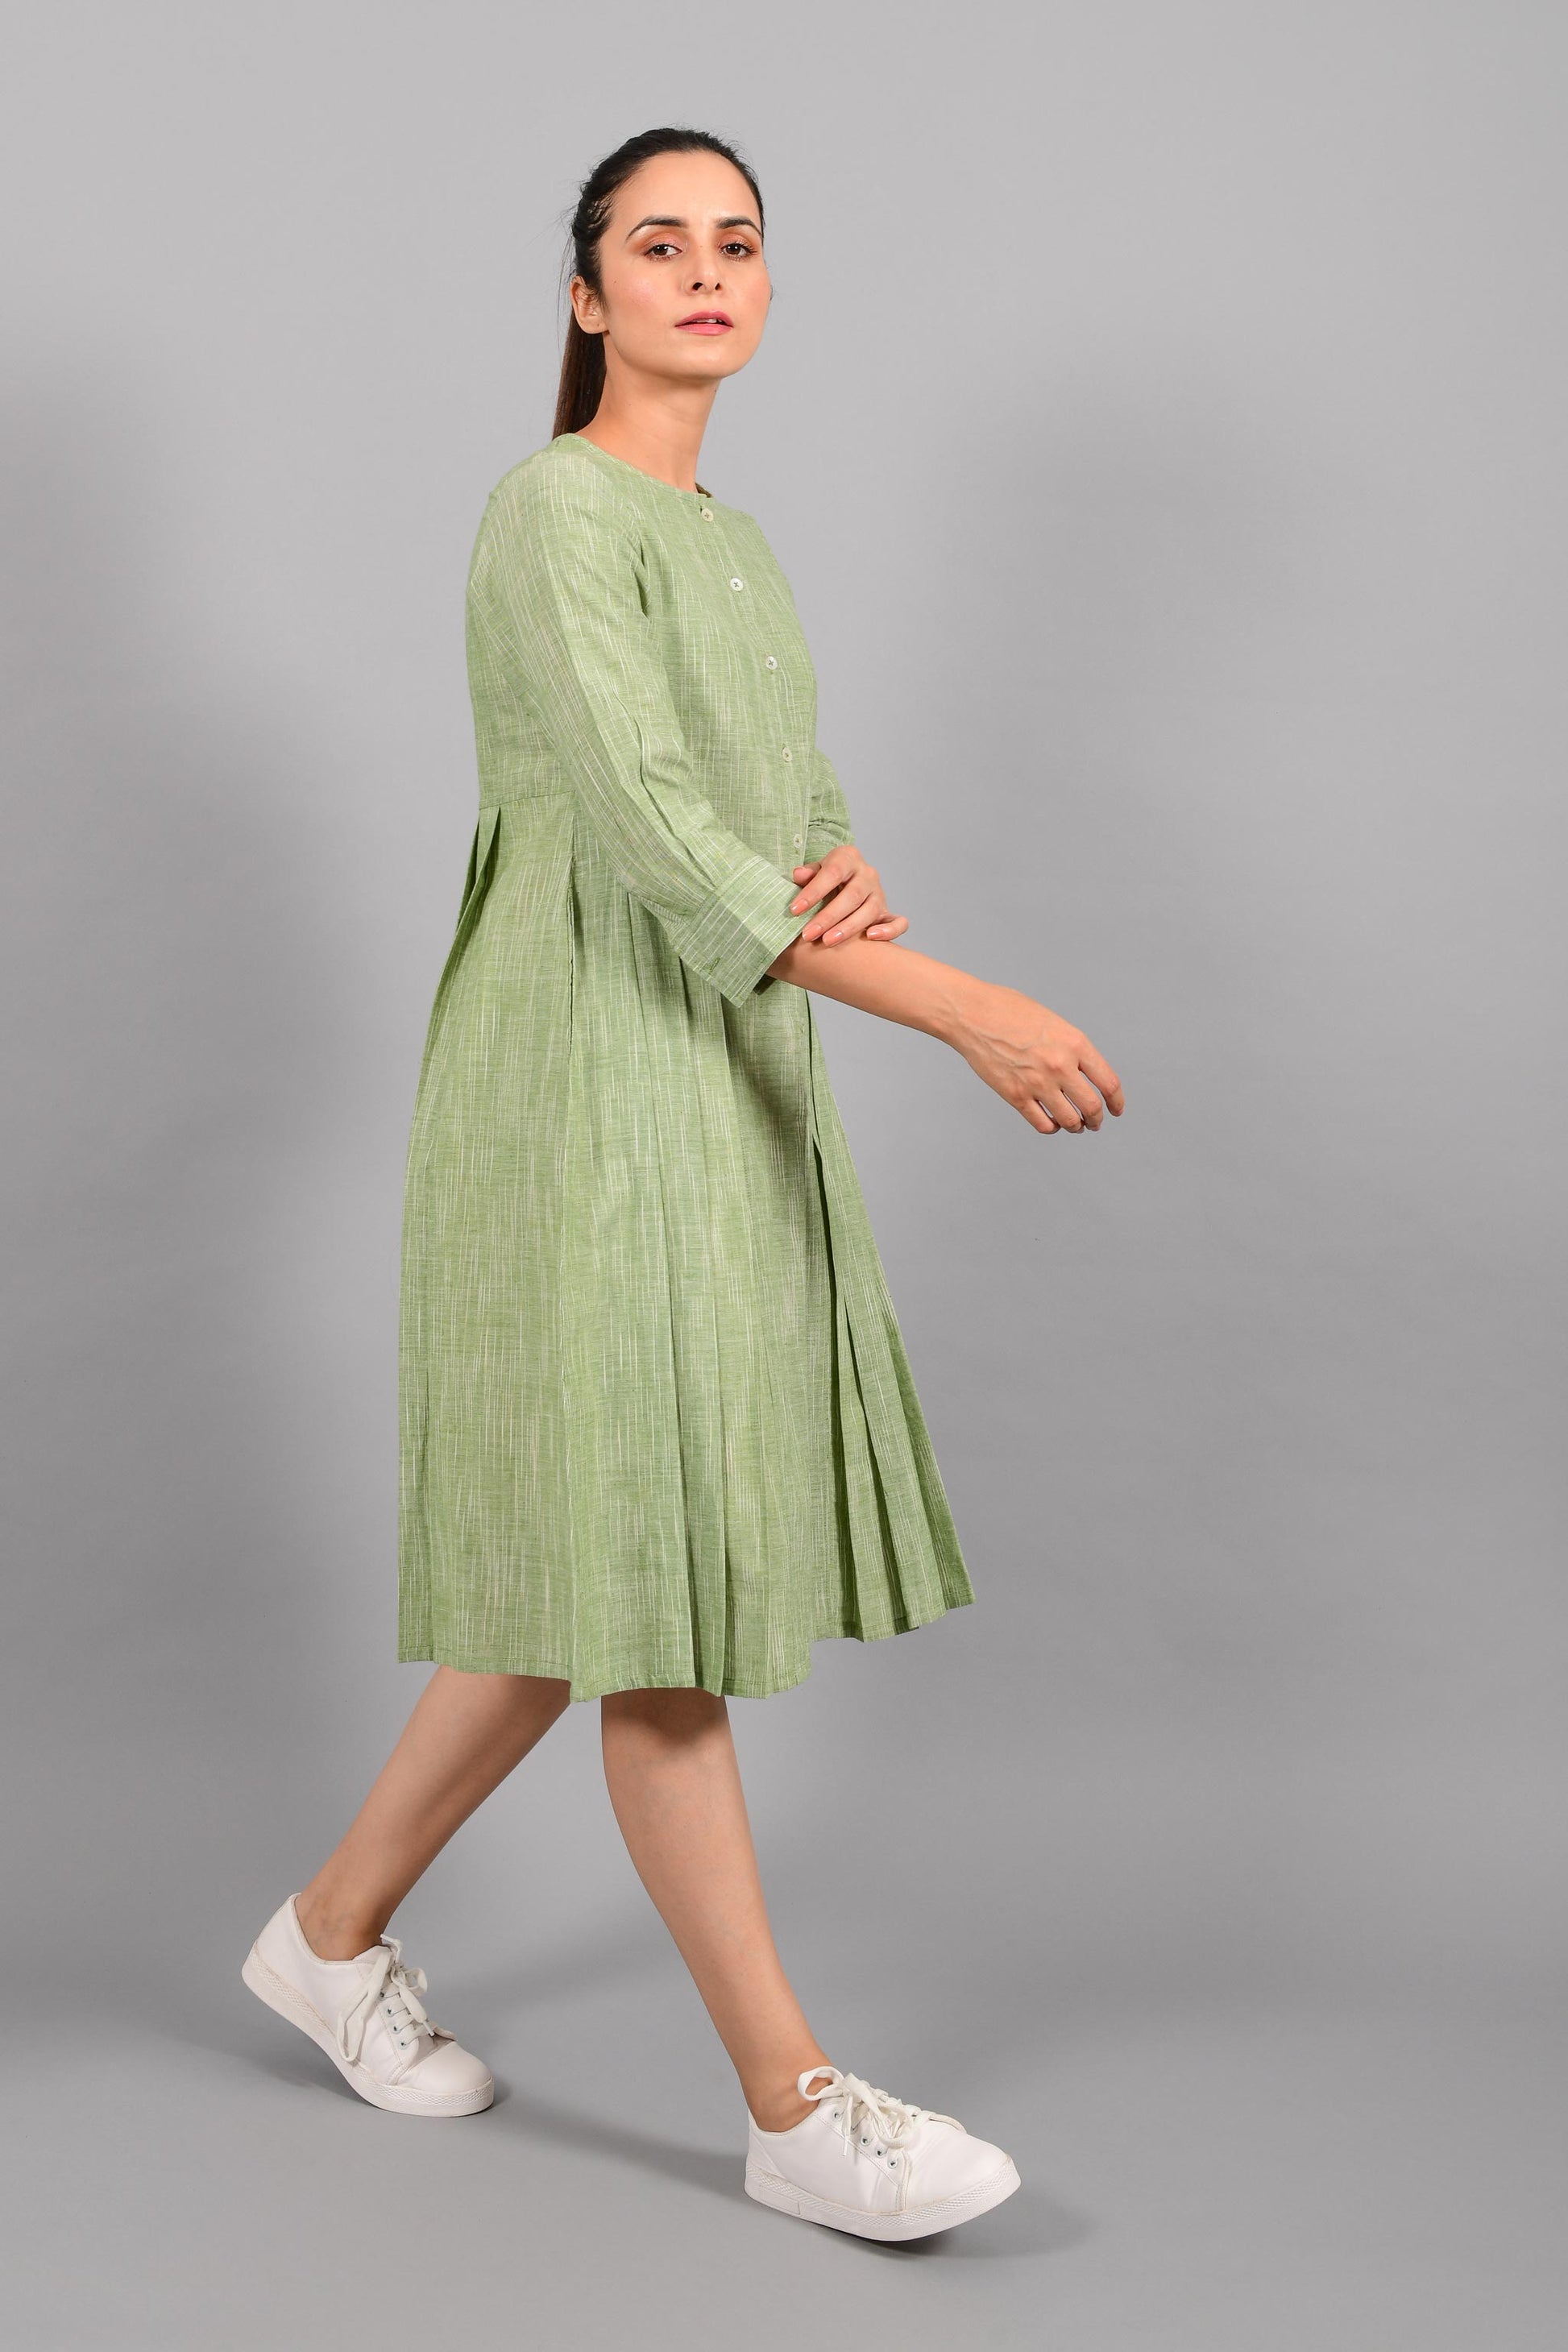 Stylised side pose of an Indian female womenswear fashion model in a space dyed olive green handspun and handwoven khadi cotton pleated dress-kurta by Cotton Rack.